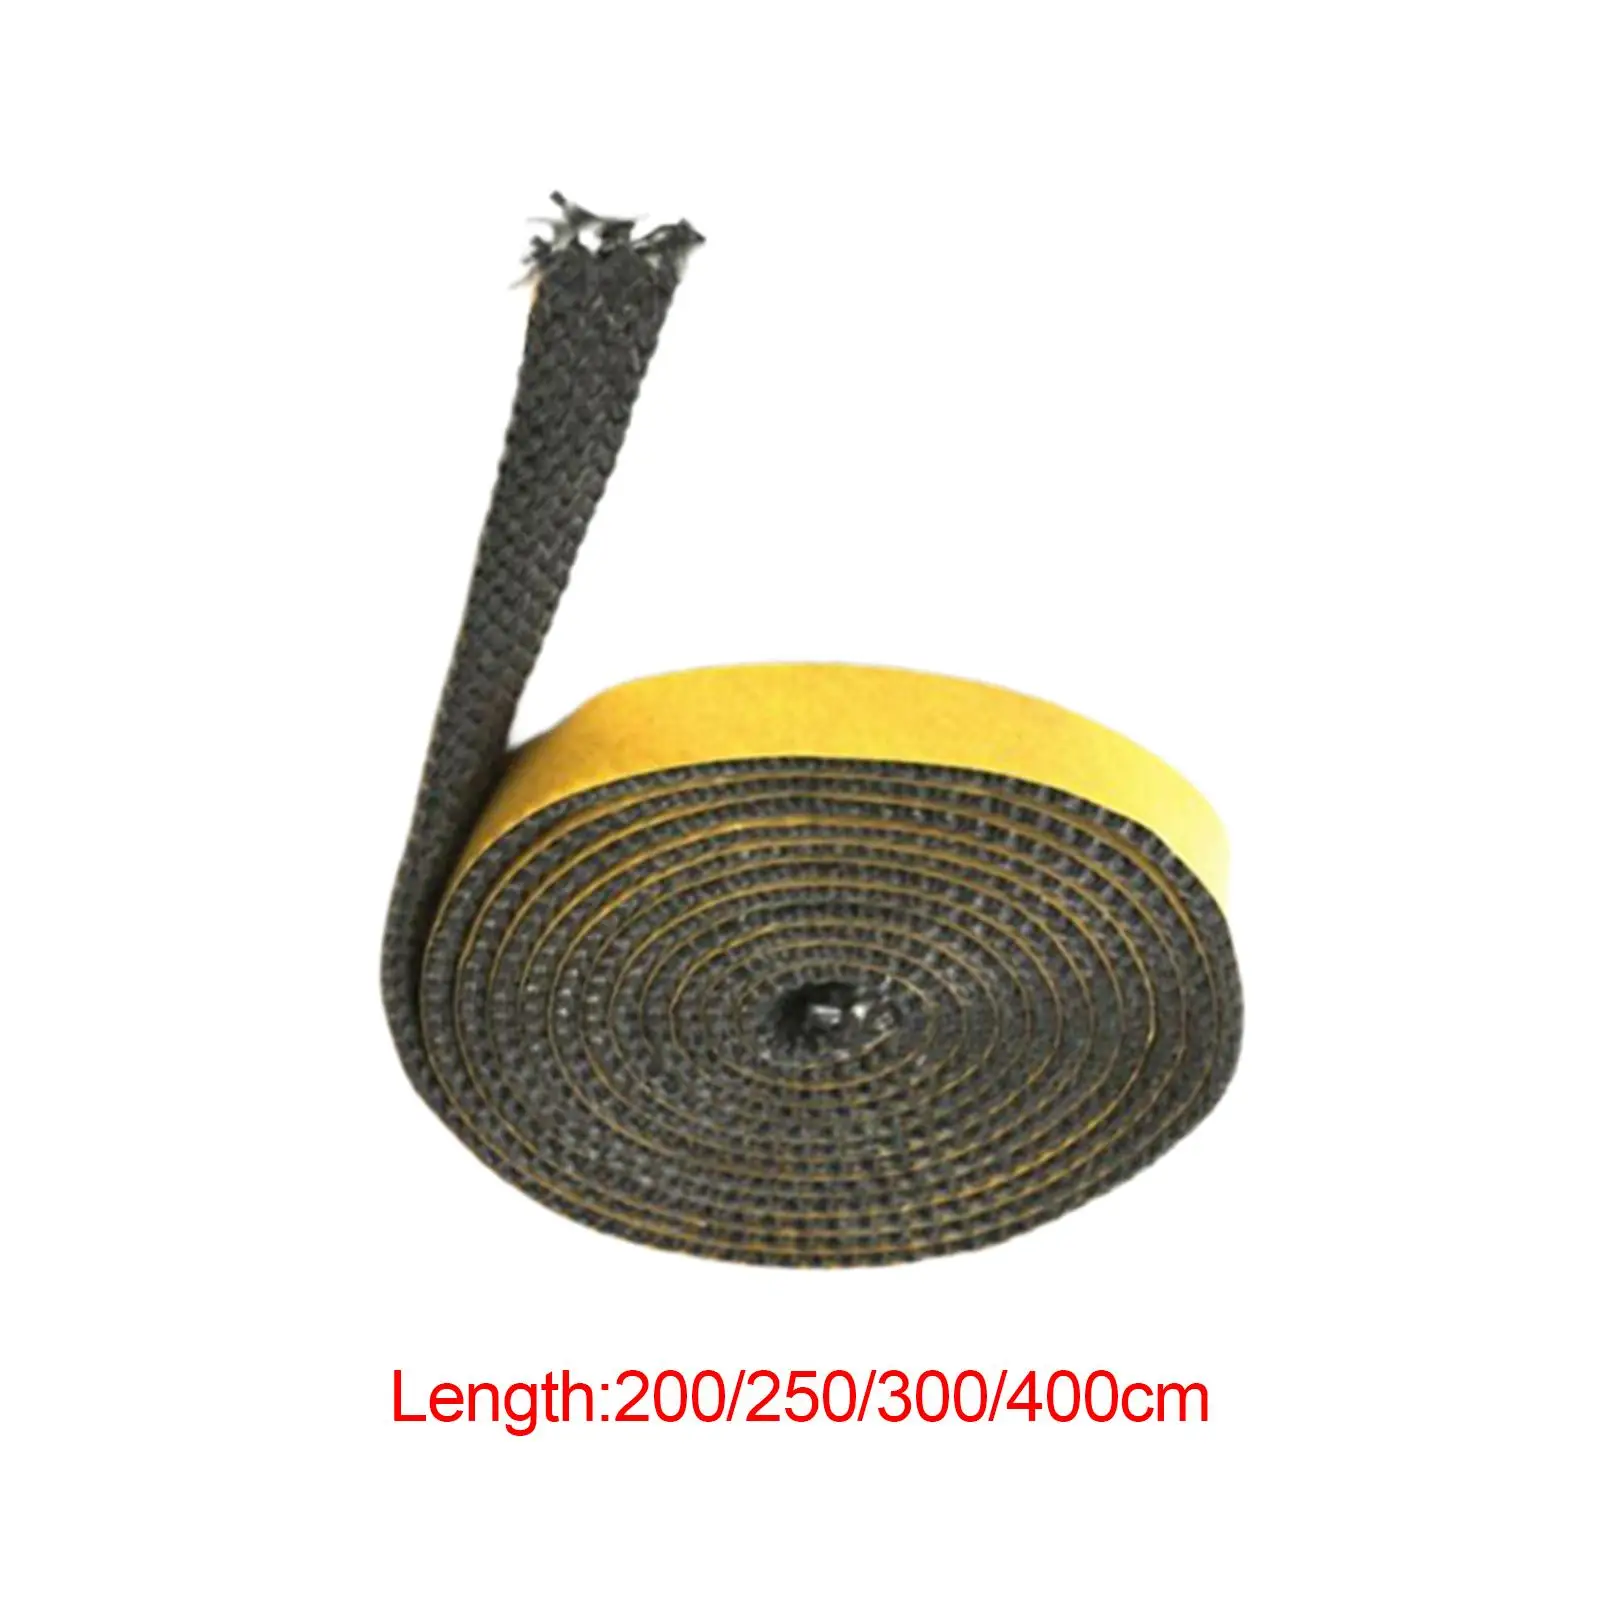 Stoves Gasket Fiberglass Flat Gasket Tape Multipurpose High Temperature Resistance Replace for Oven Stoves Door Window Fireplace